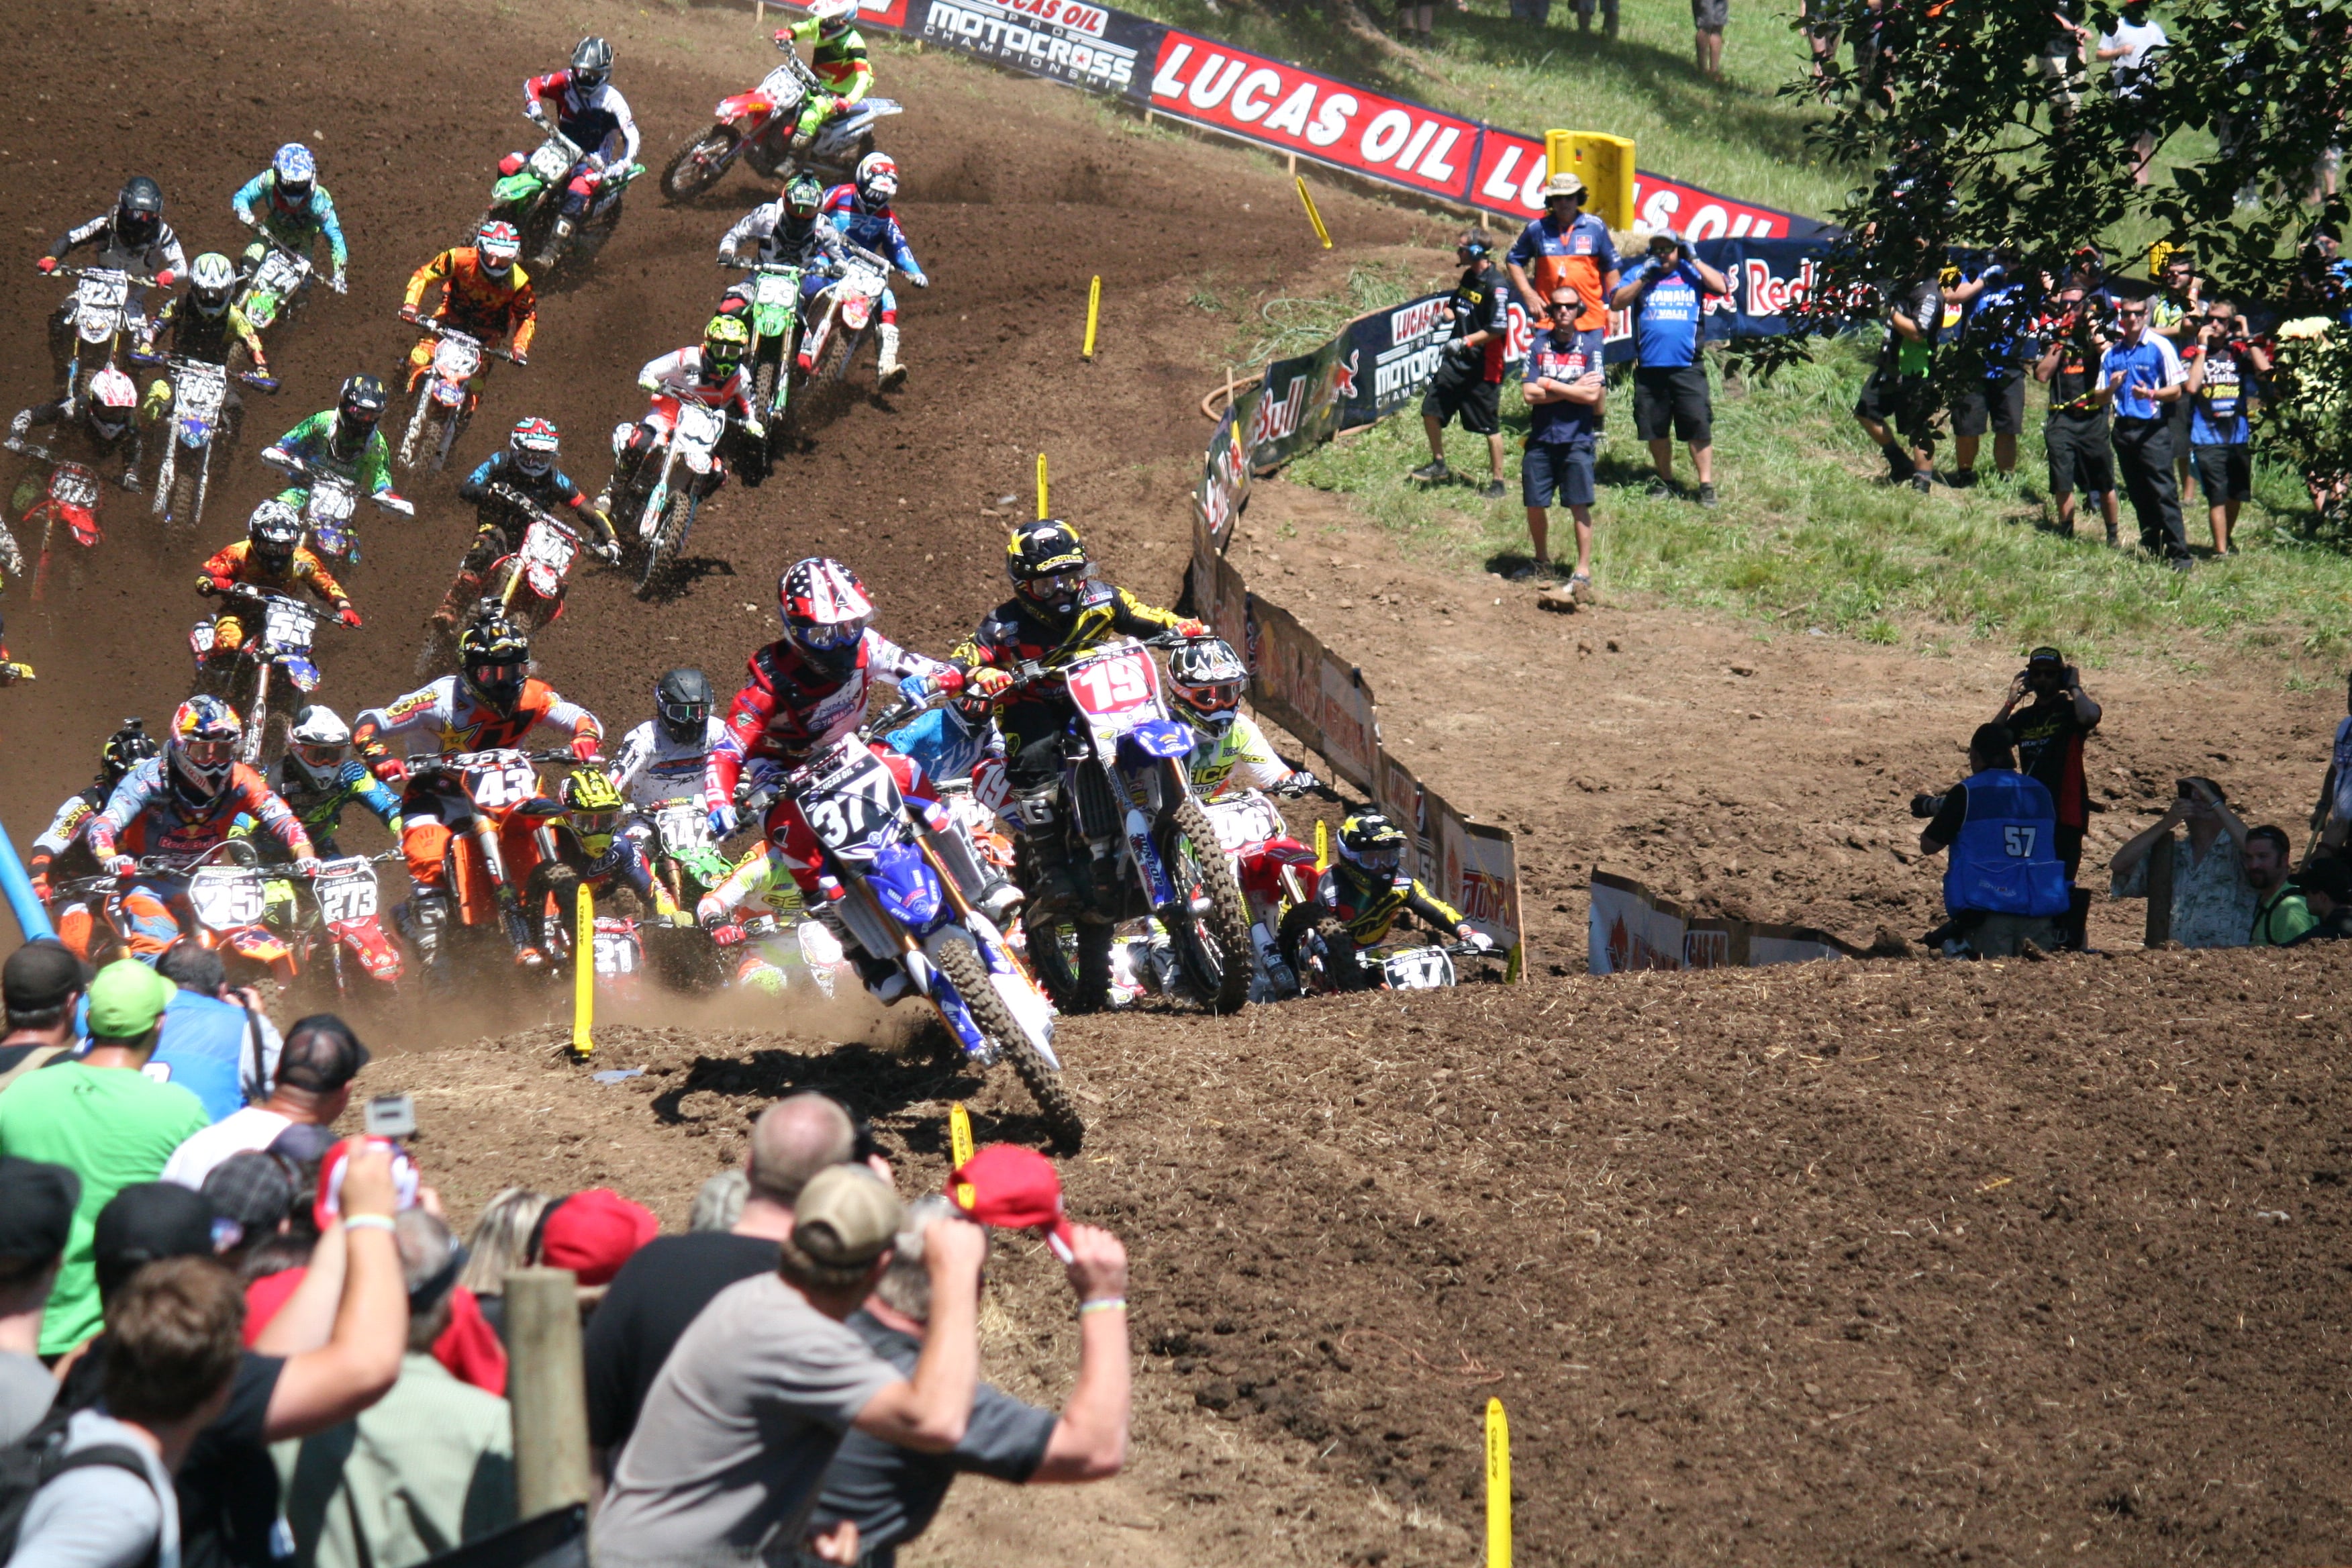 The first 250 moto of the Lucas Oil Pro Motocross Championship at Washougal MX Park.